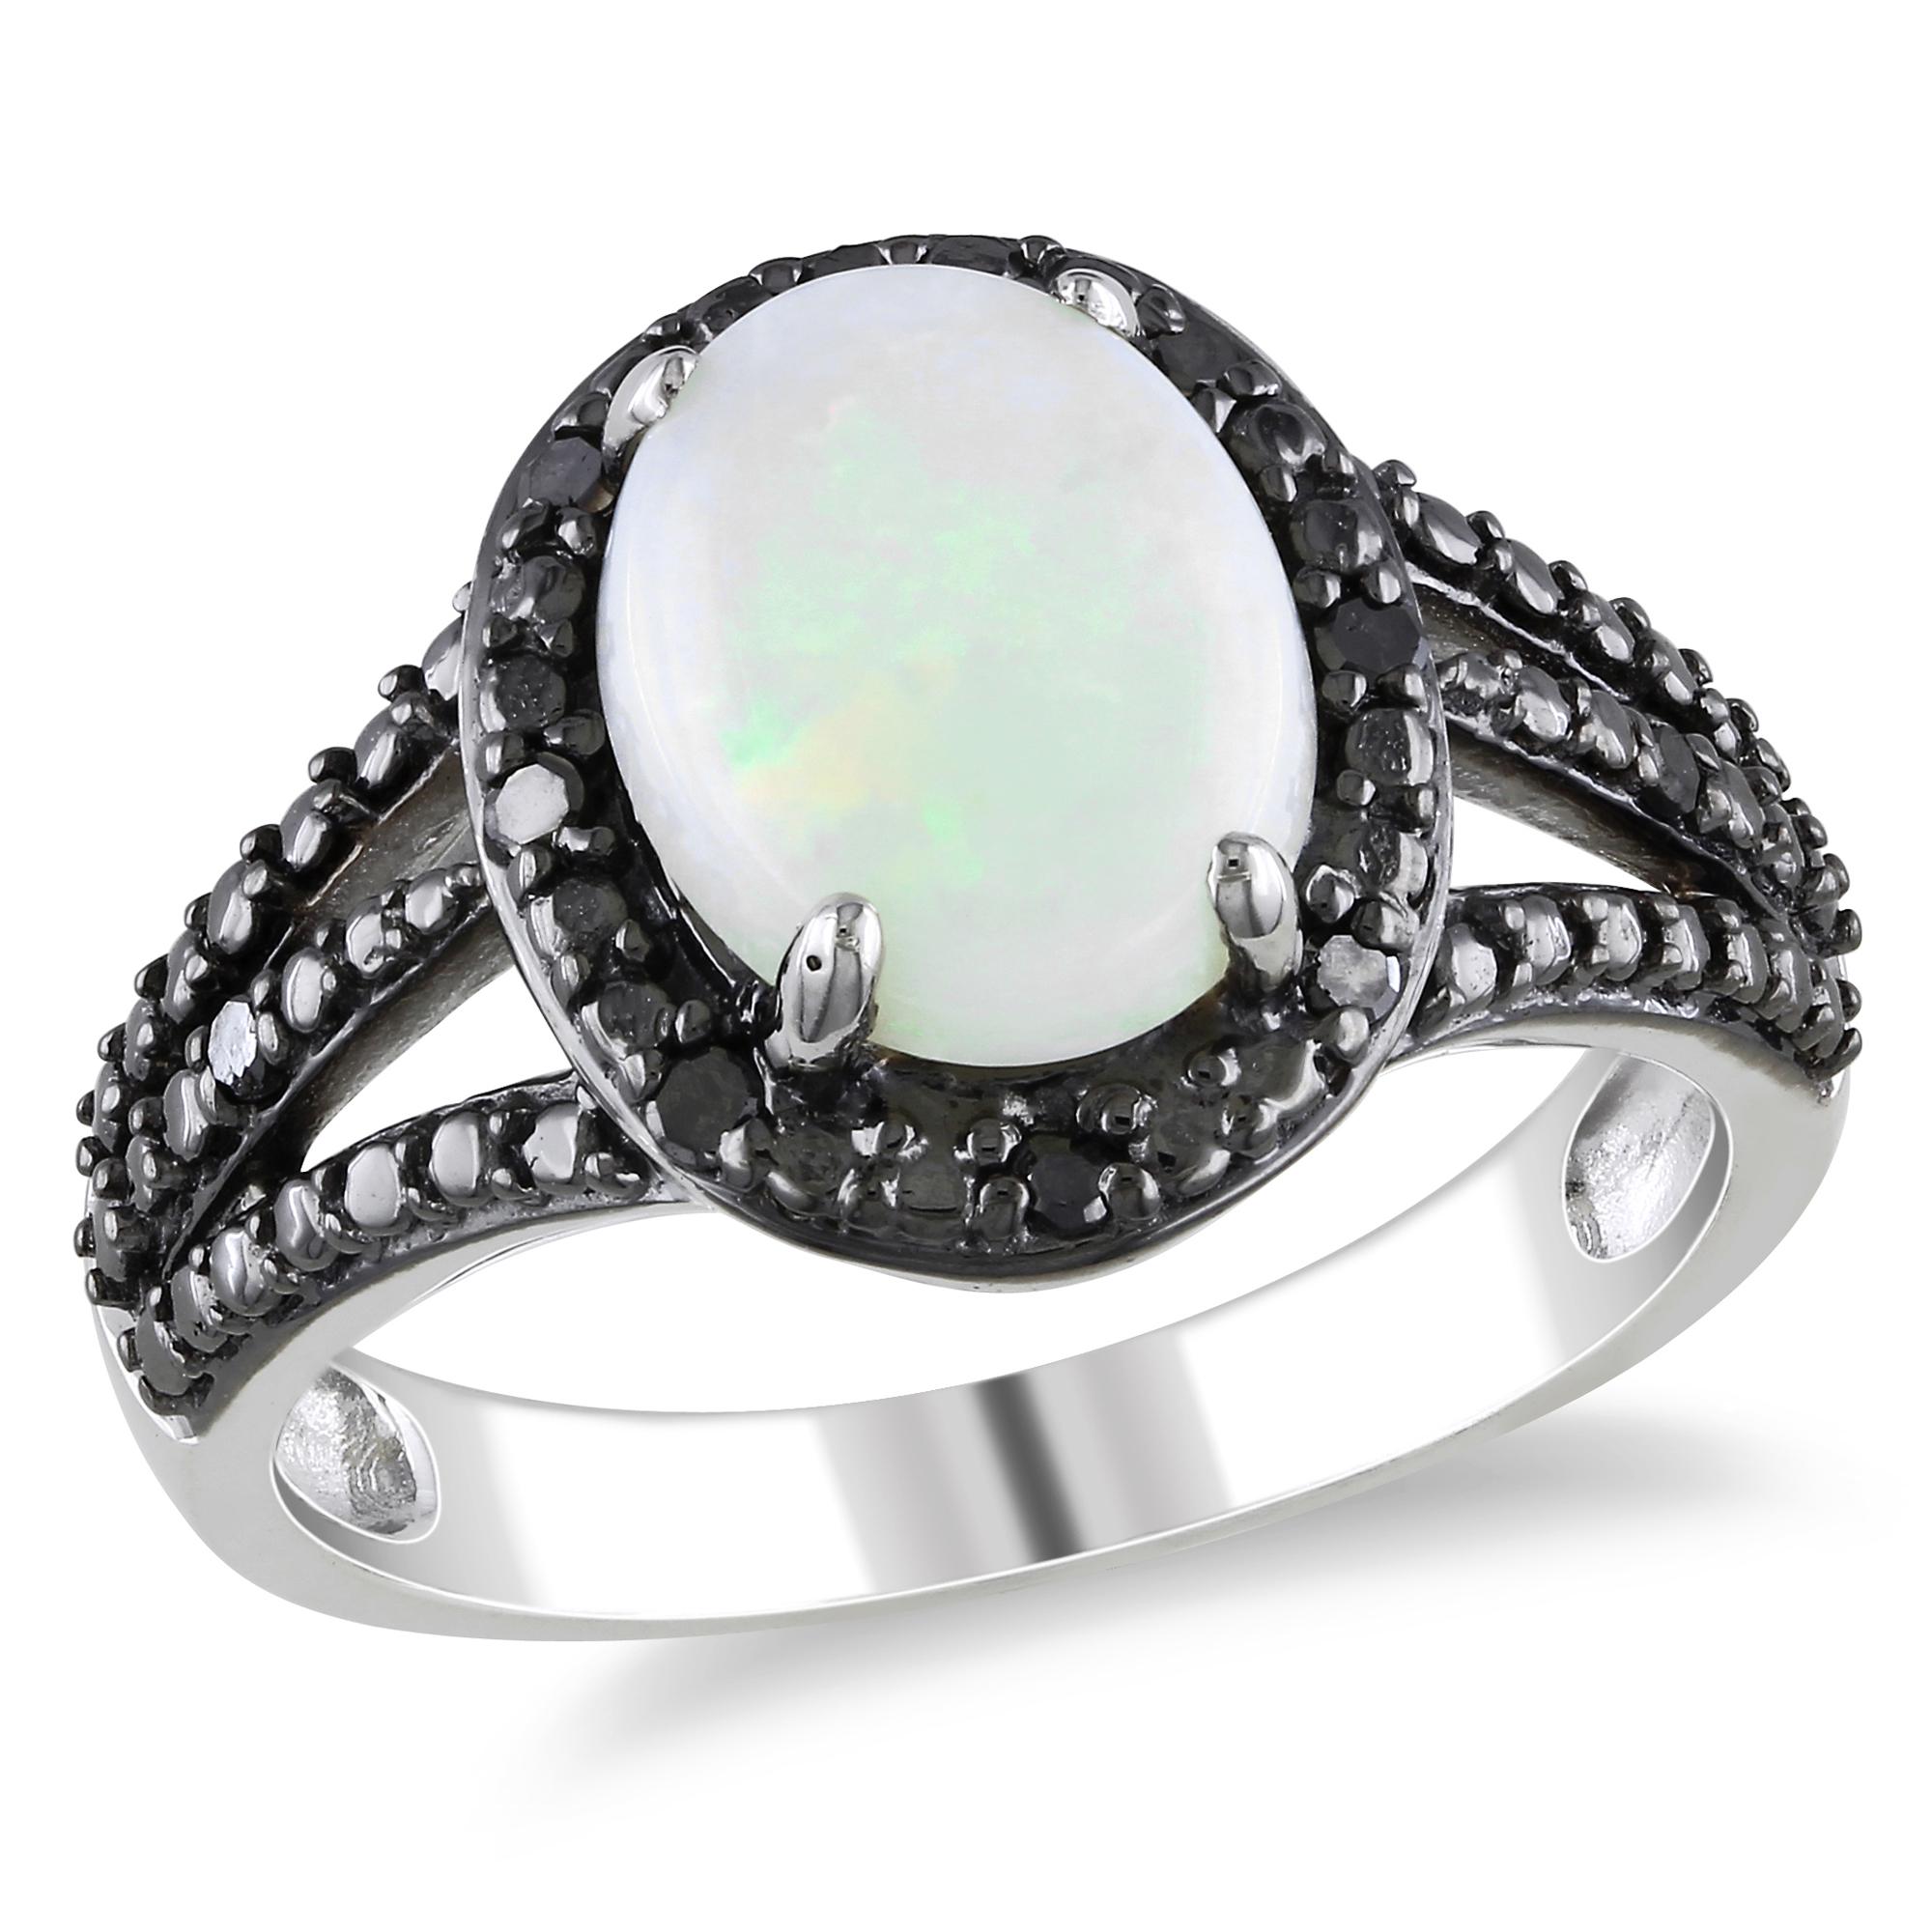 Amour 1/10 Carat Black Diamond T.W. and 1 5/8 Carat T.G.W. Opal Fashion Ring in Sterling Silver Black Plated